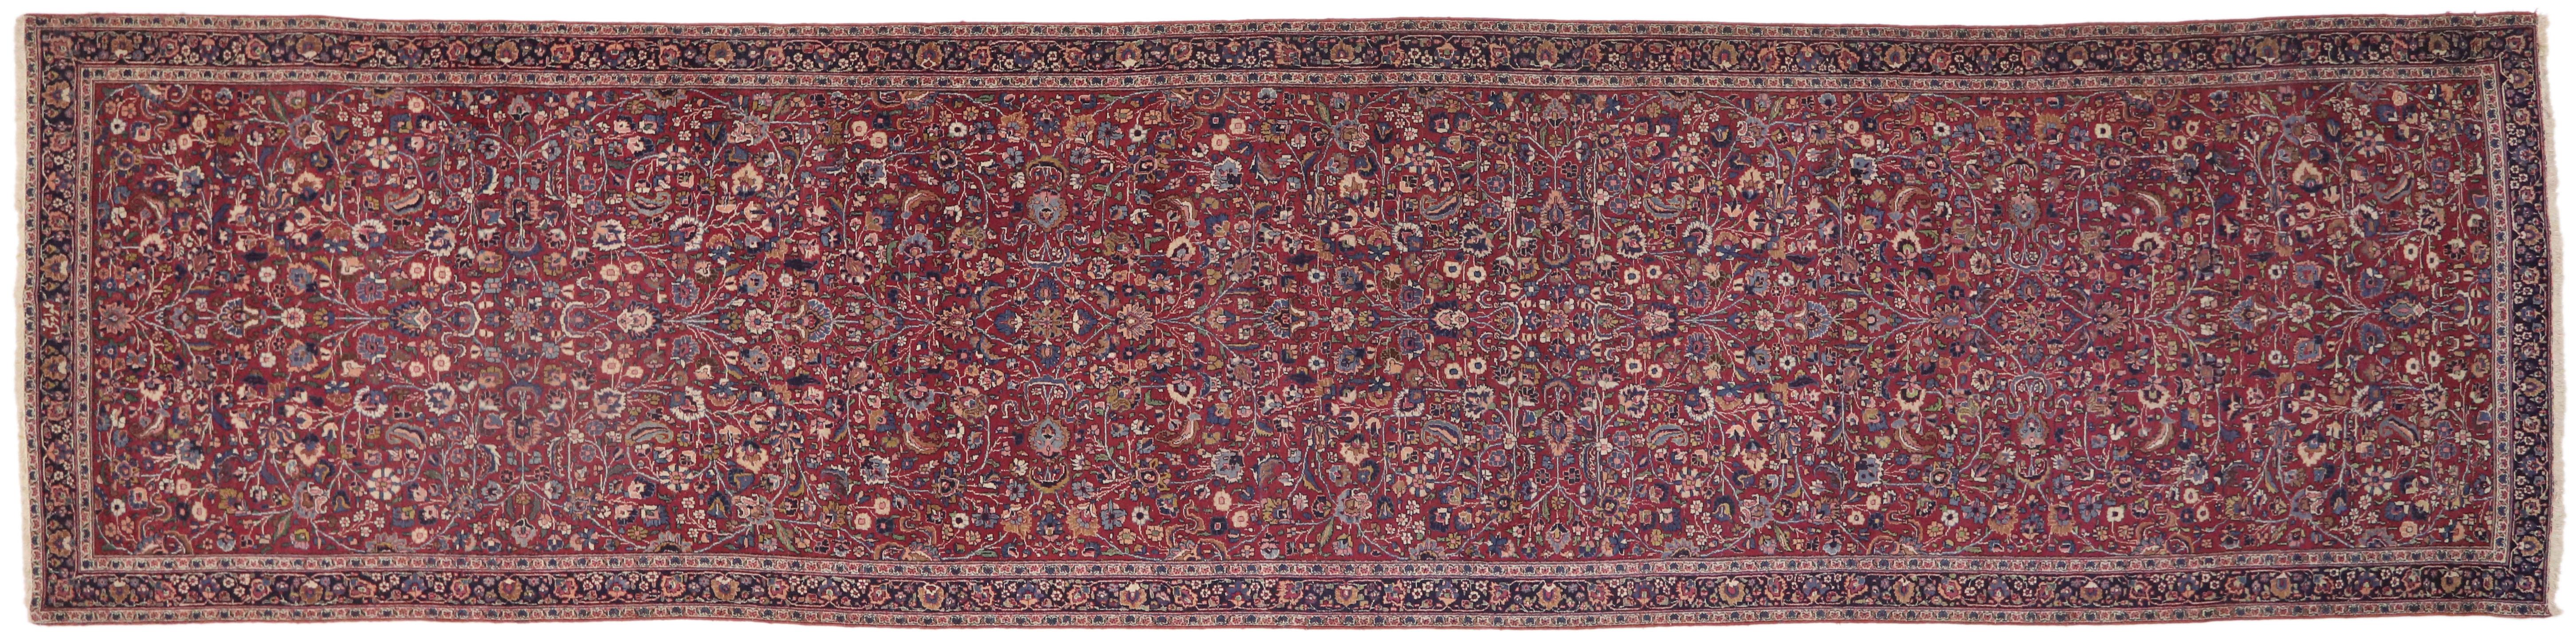 Antique Persian Mashhad Runner with Old World Style, Extra-Long Hallway Runner For Sale 3